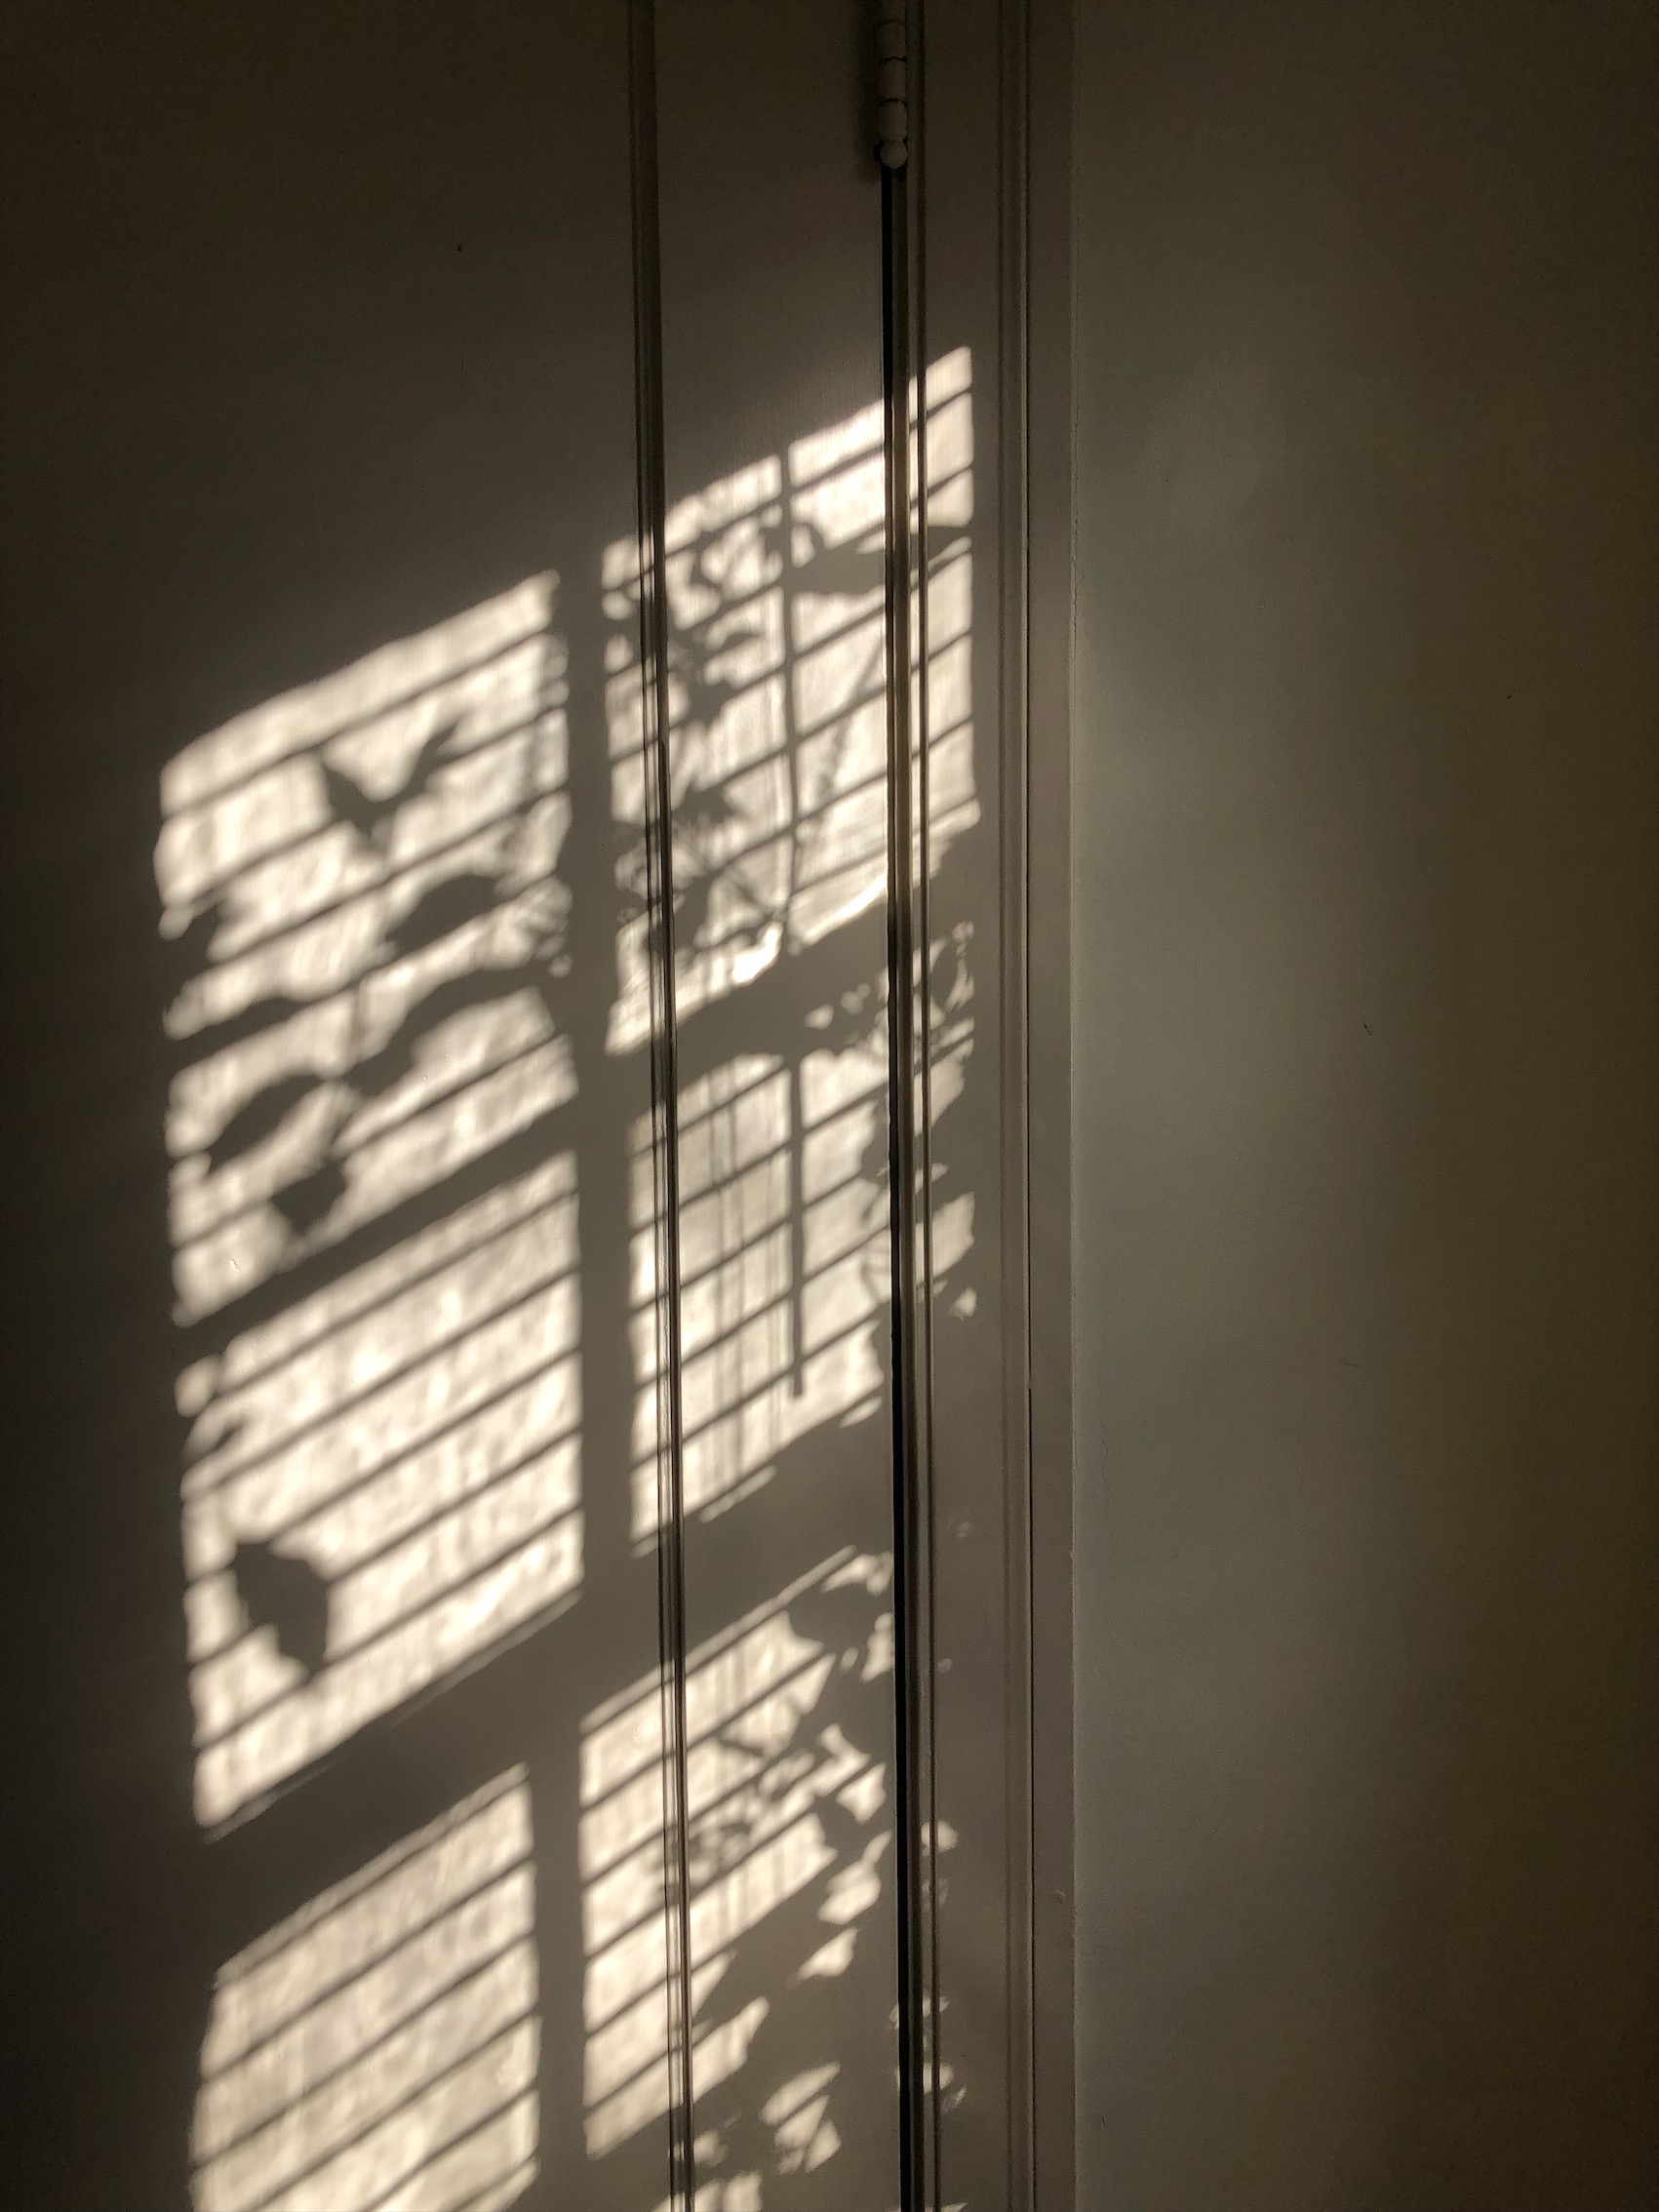 shadows of window blinds casted against a door